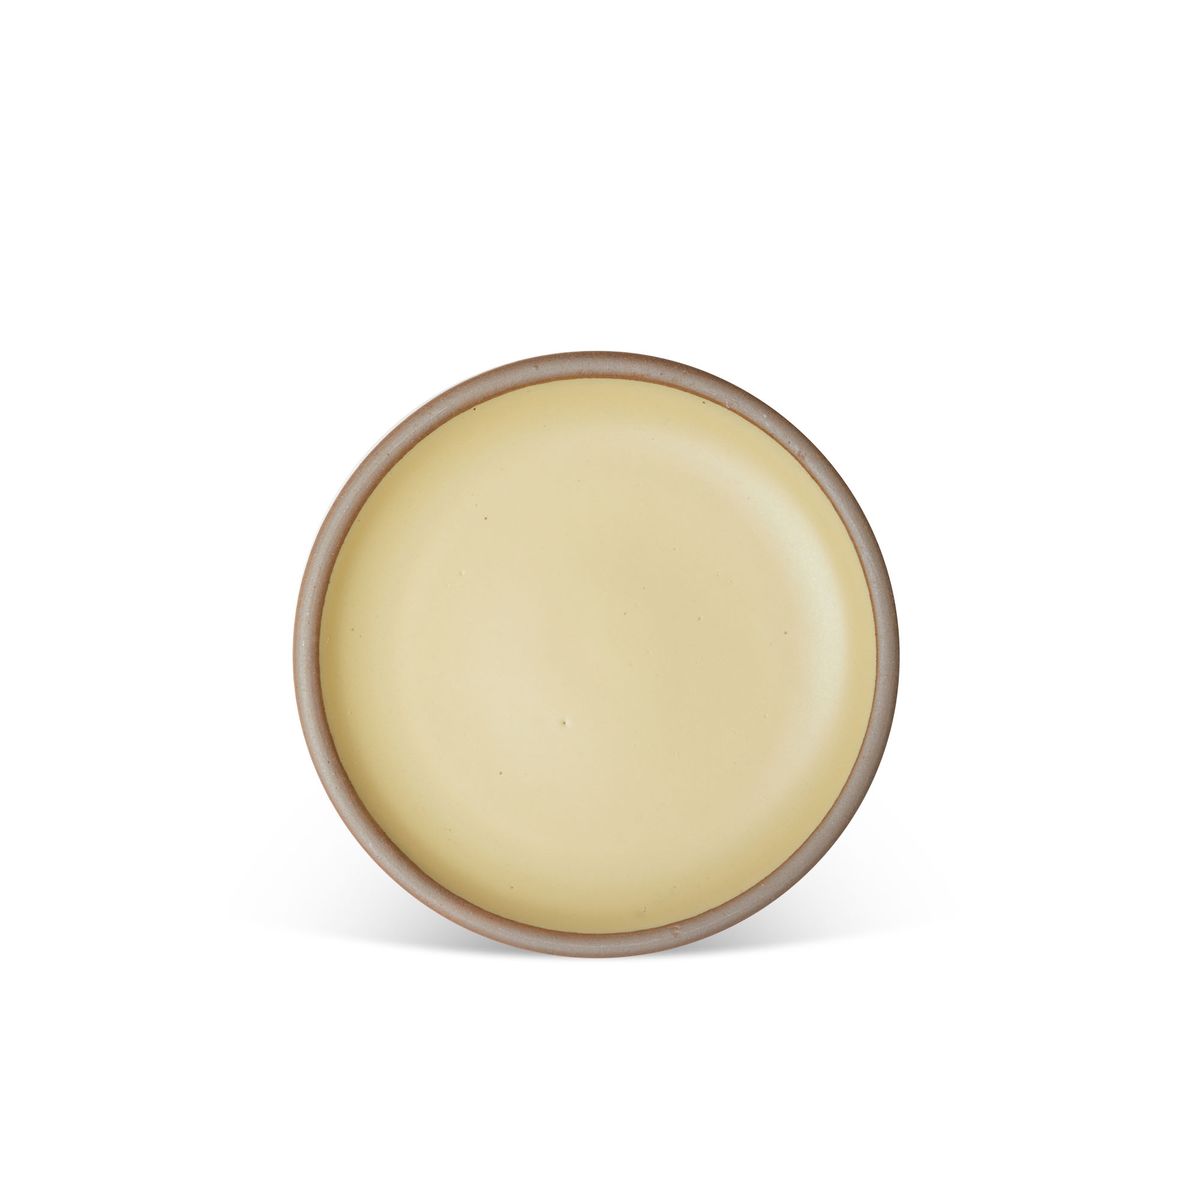 A medium sized ceramic plate in a light butter yellow color featuring iron speckles and an unglazed rim.